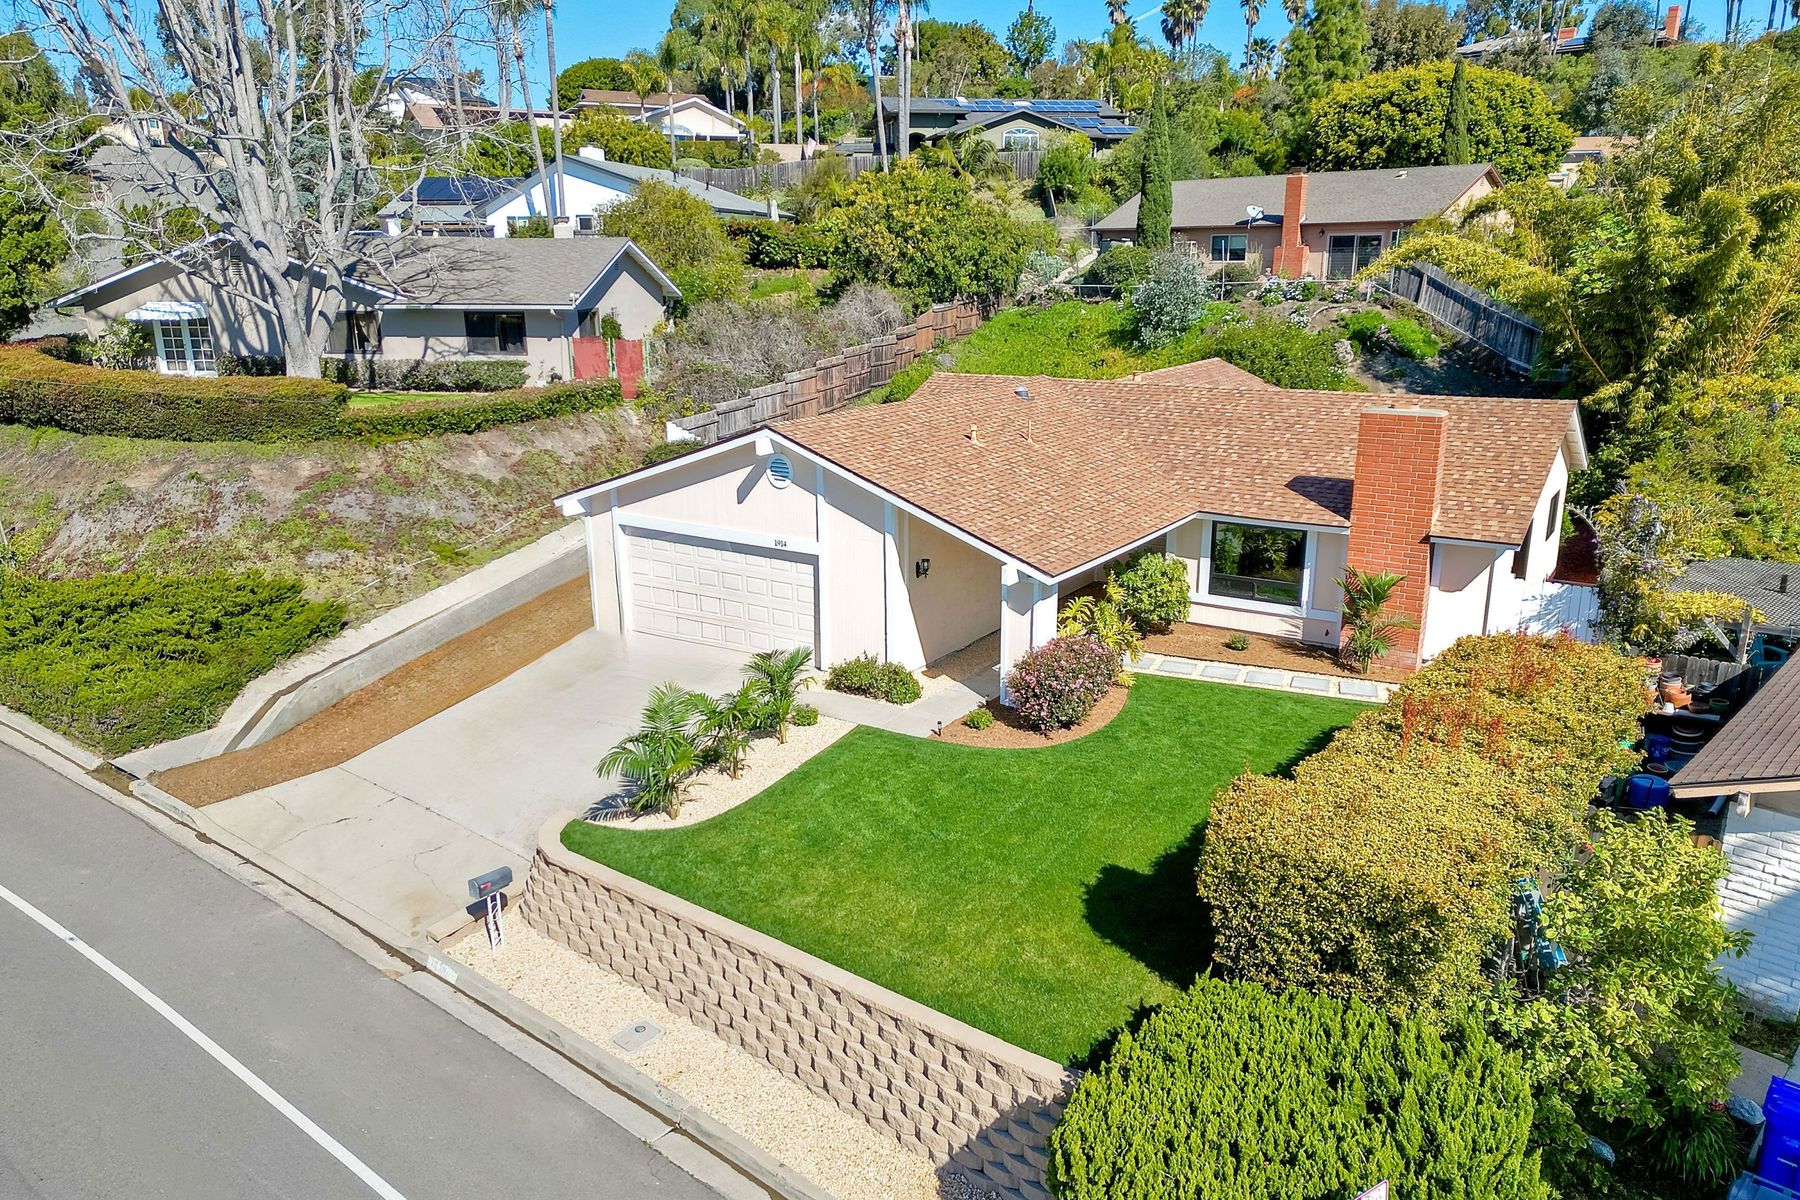 One-of-a-kind Property at 1914 Laural Rd. in Oceanside!